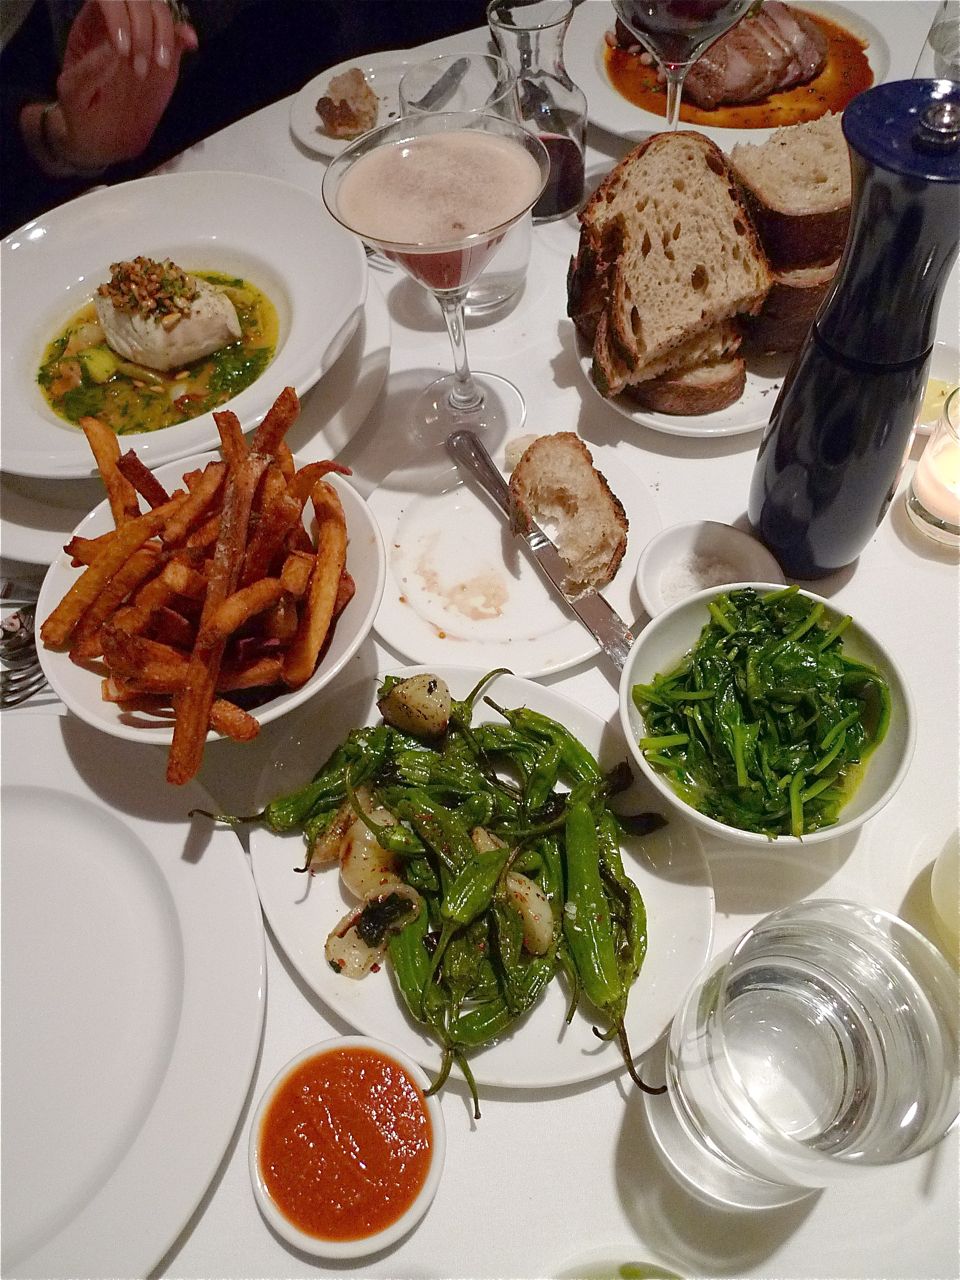 From right: griddled spinach, grilled Shishitos,thrice-fried fries, halibut. Photo: Steven Richter 